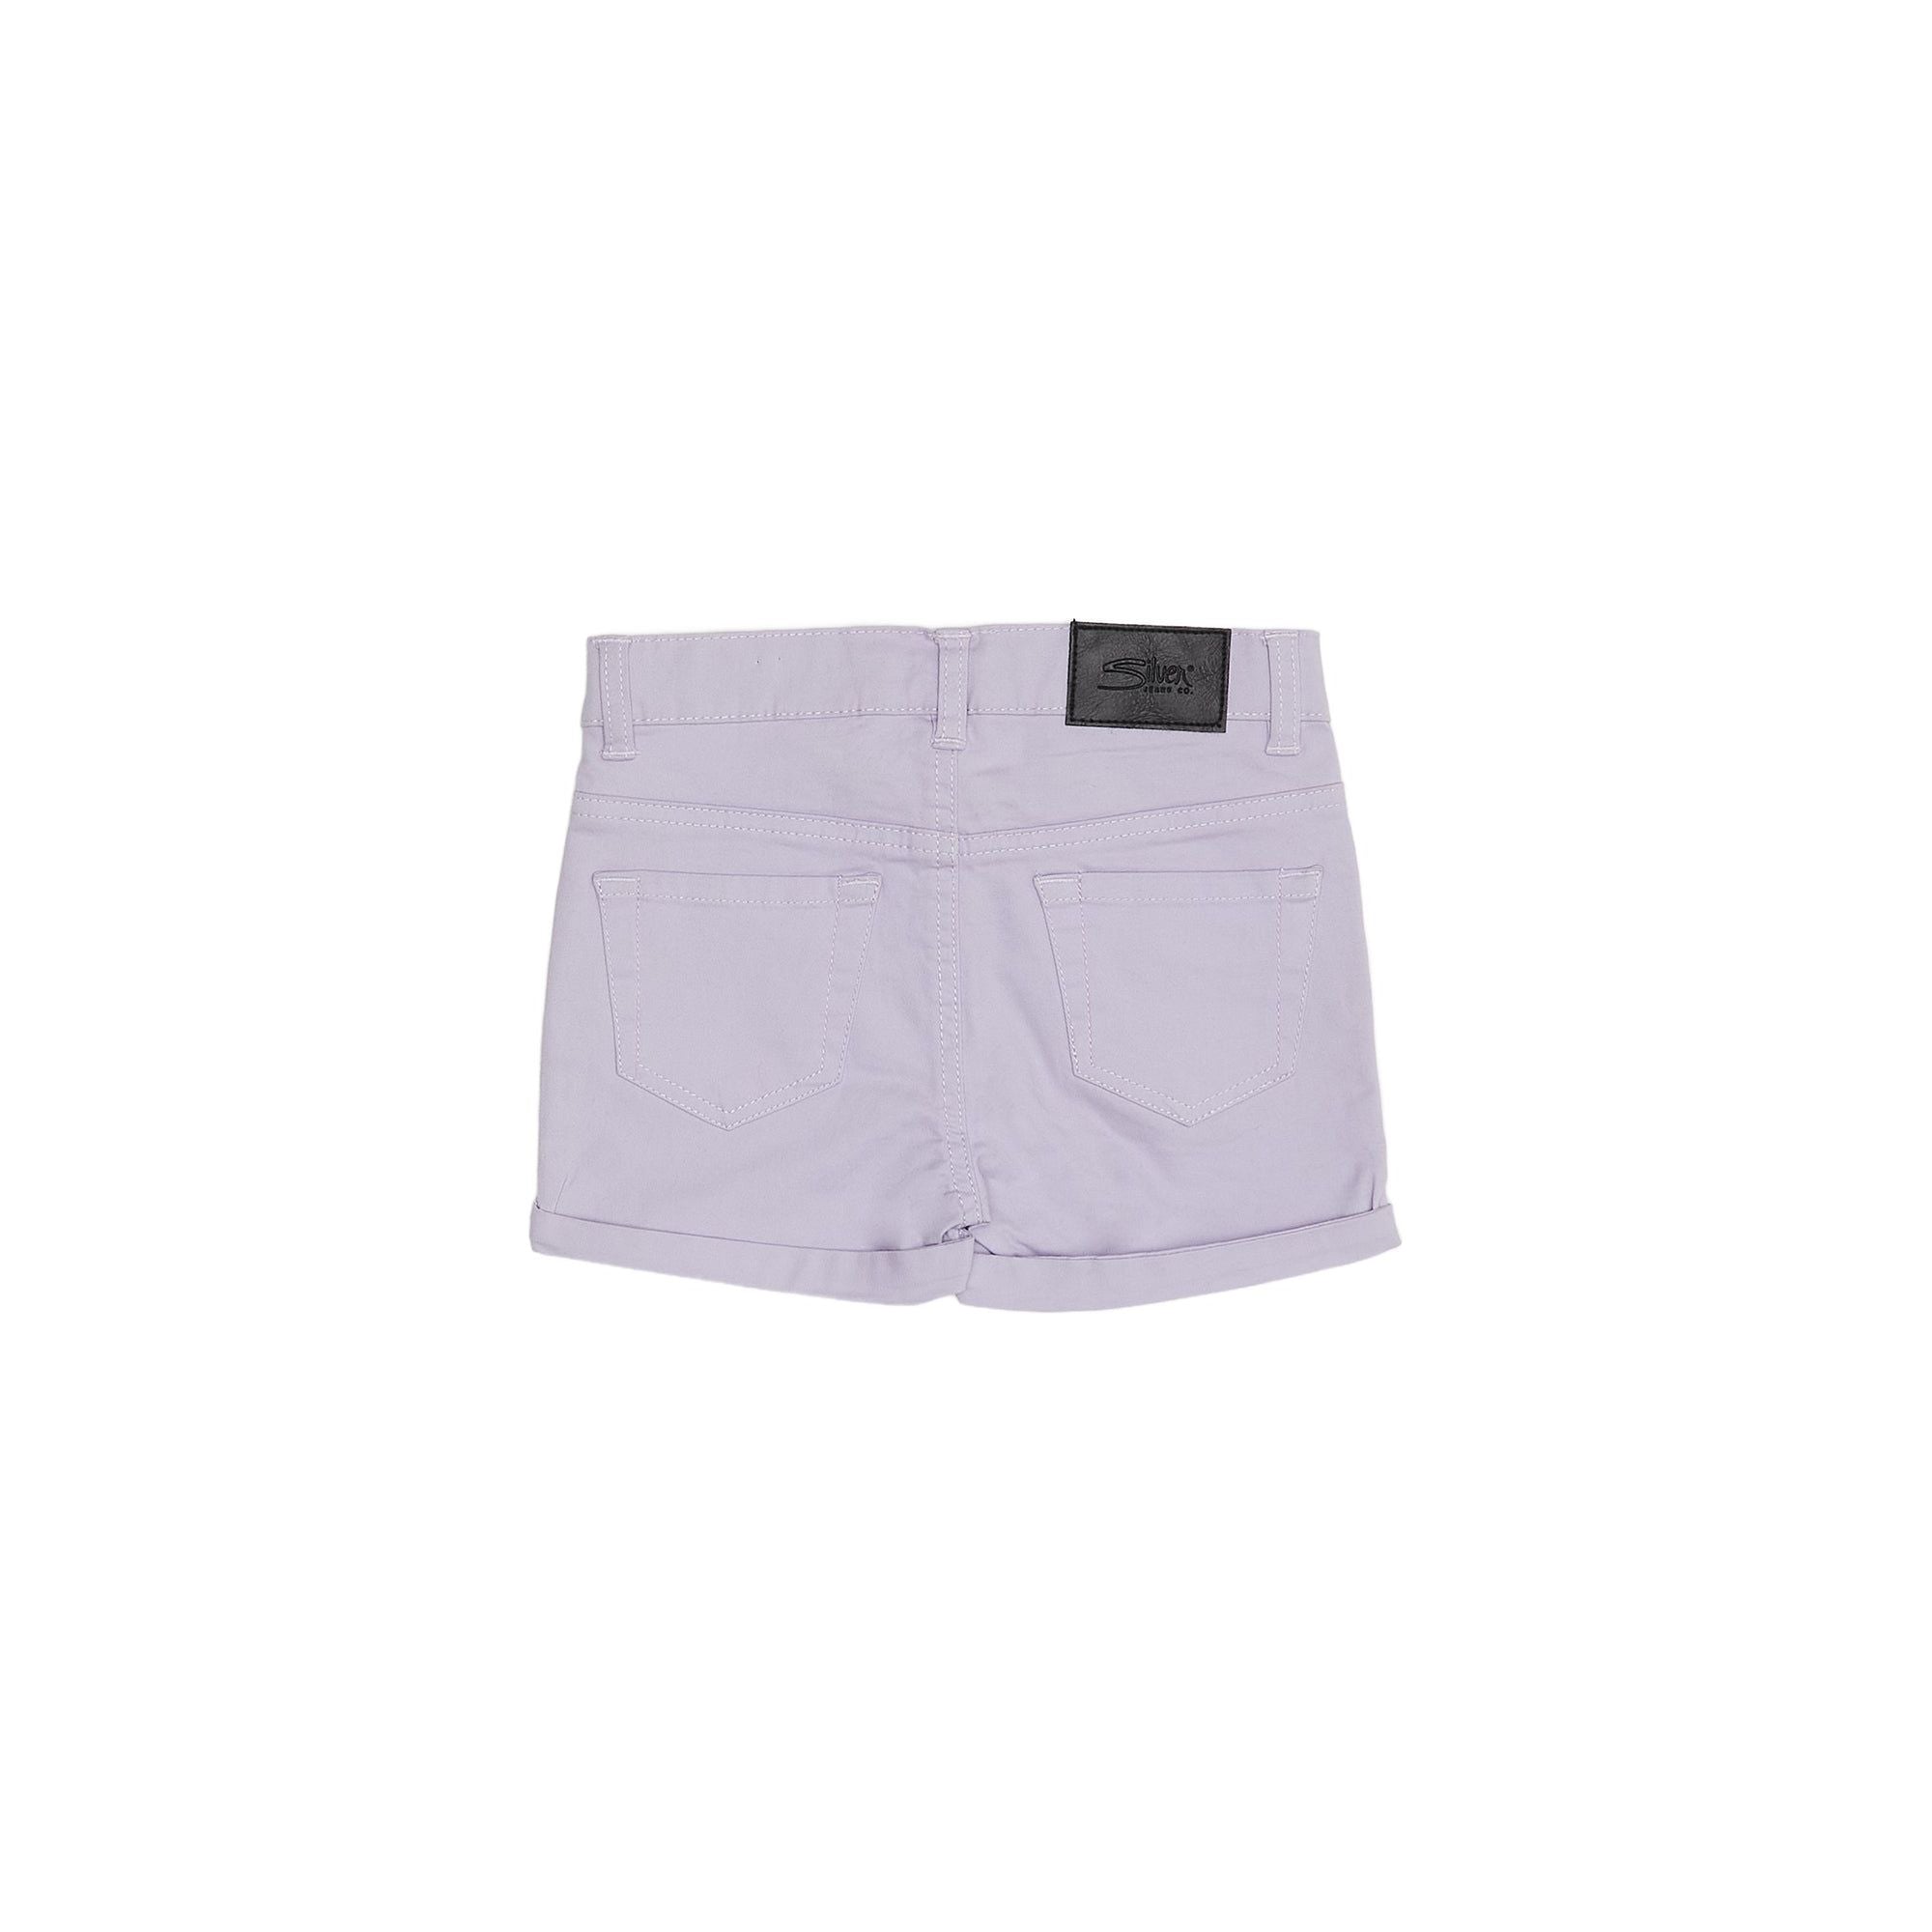 Silver Jeans - Girls Shorts in Lavender